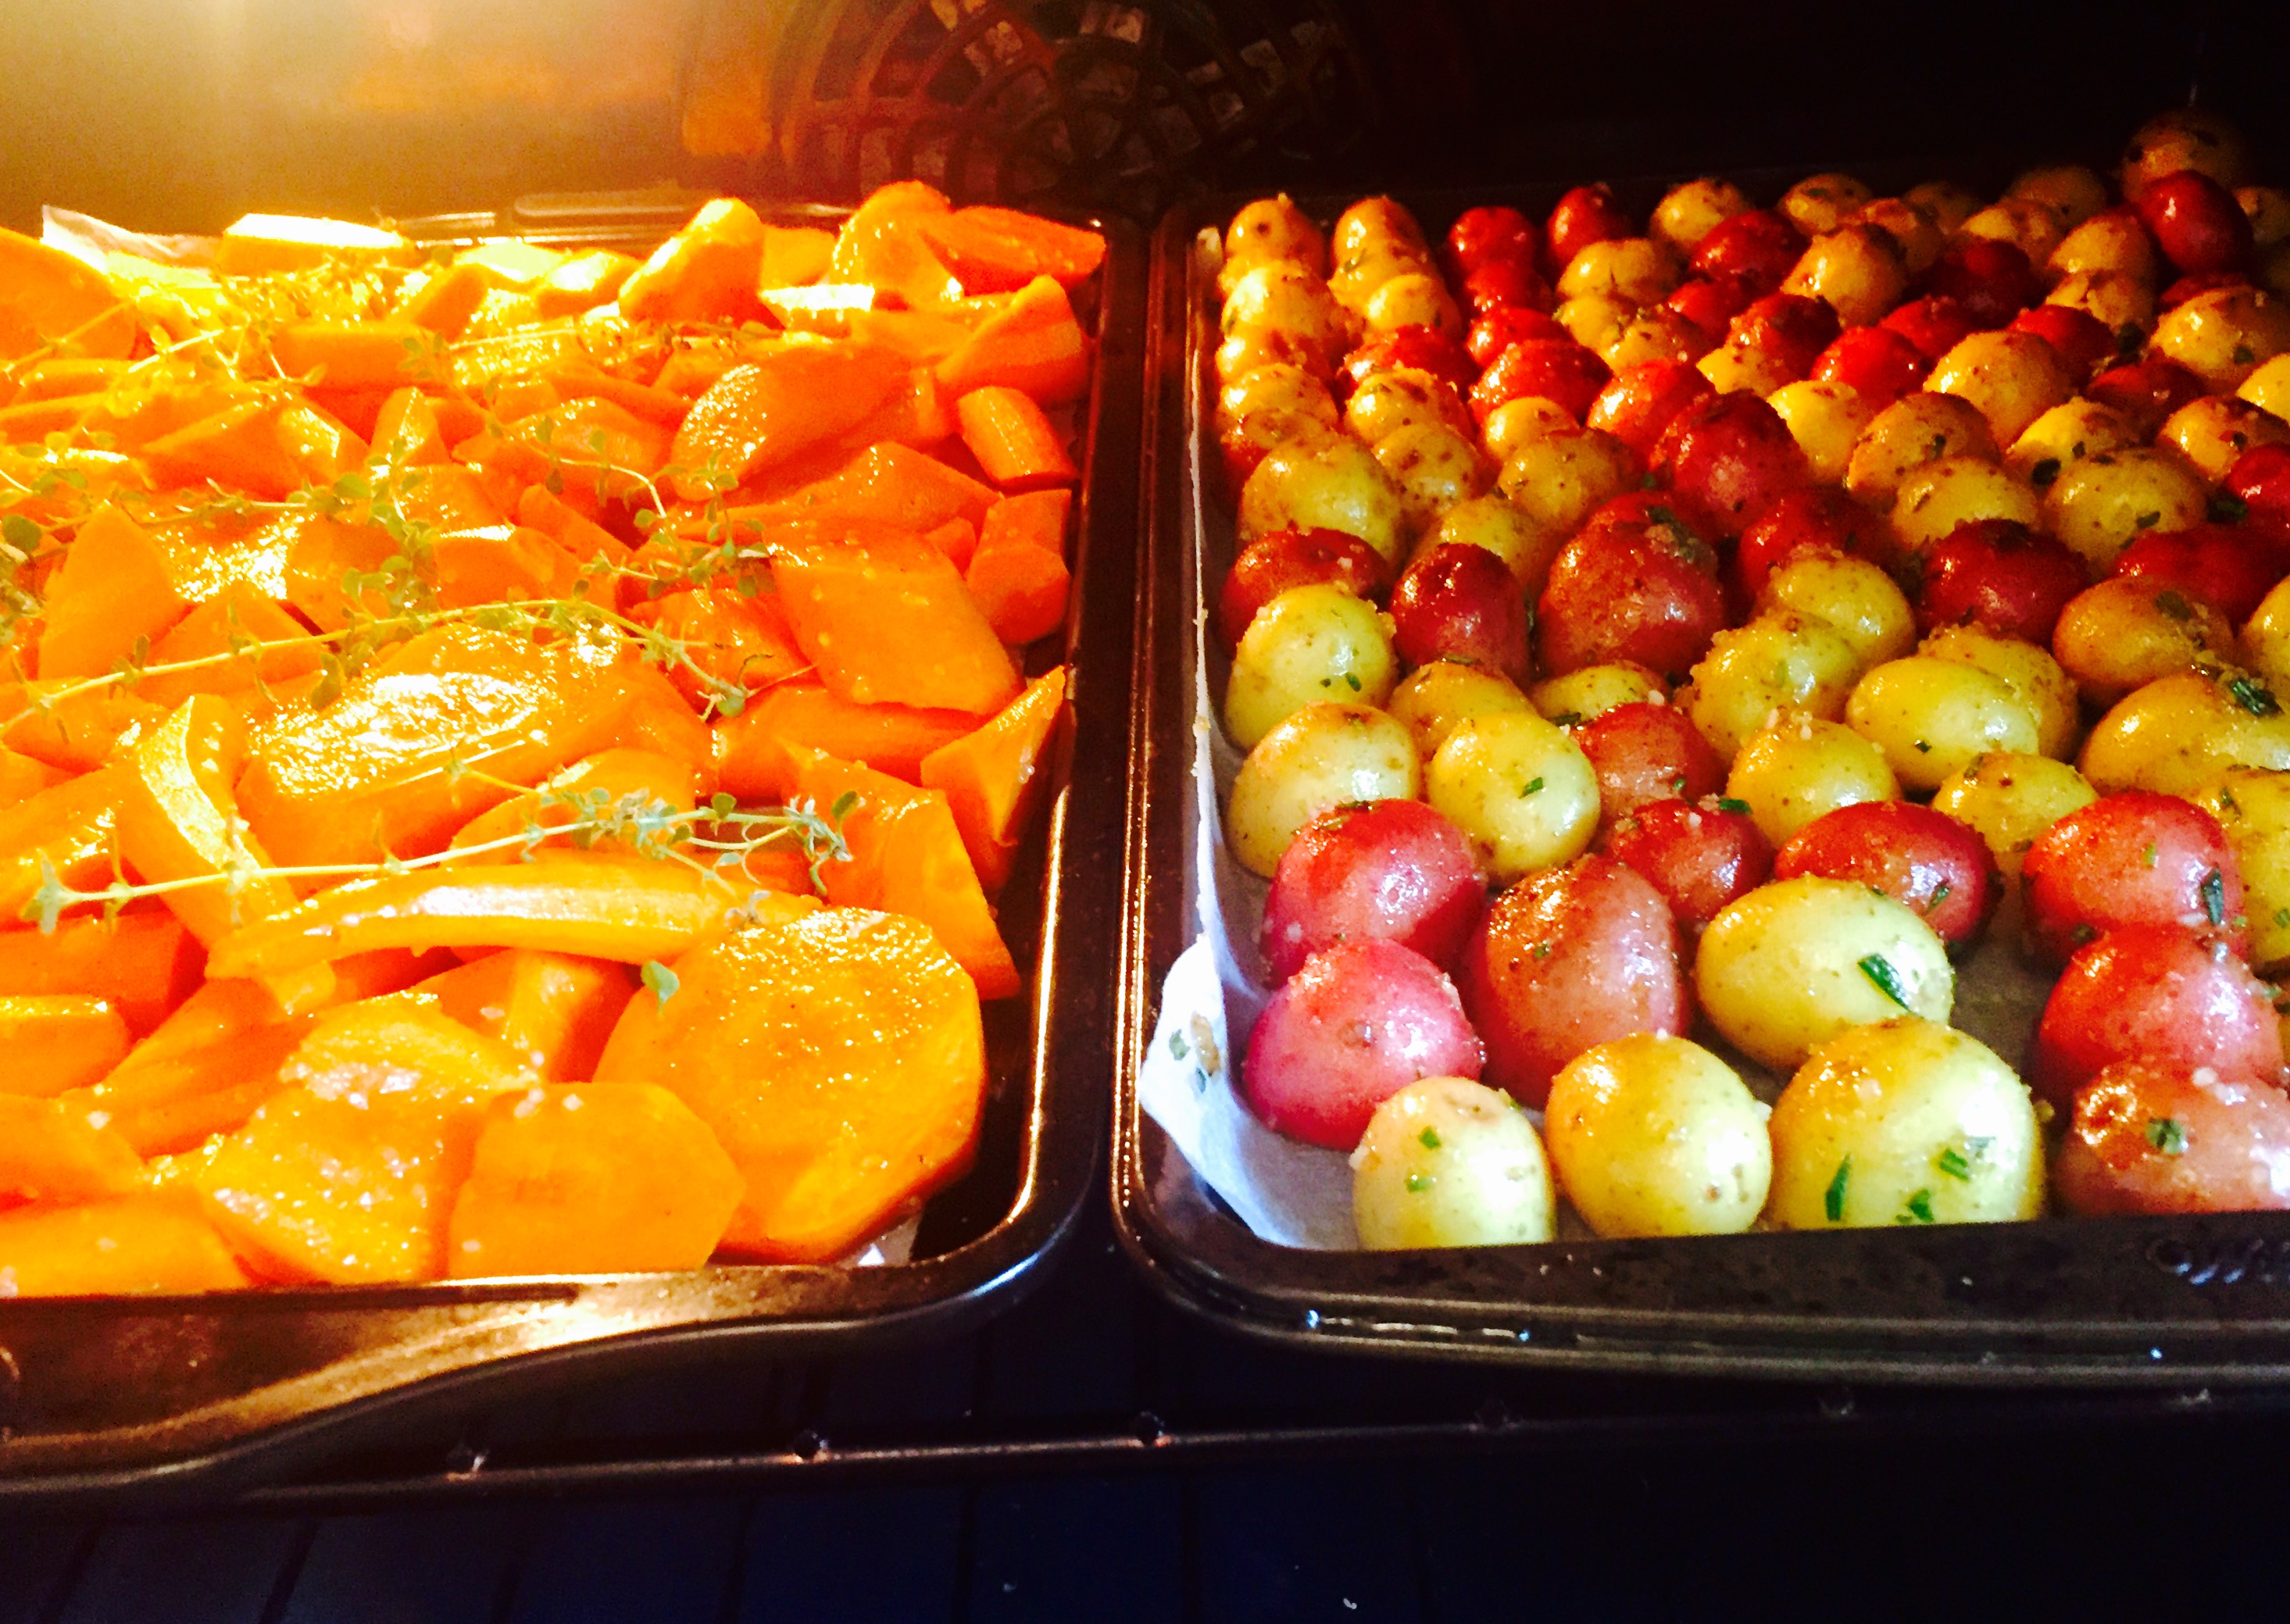 Herbed new potatoes & maple-glazed carrots roasting nicely in a 400° oven